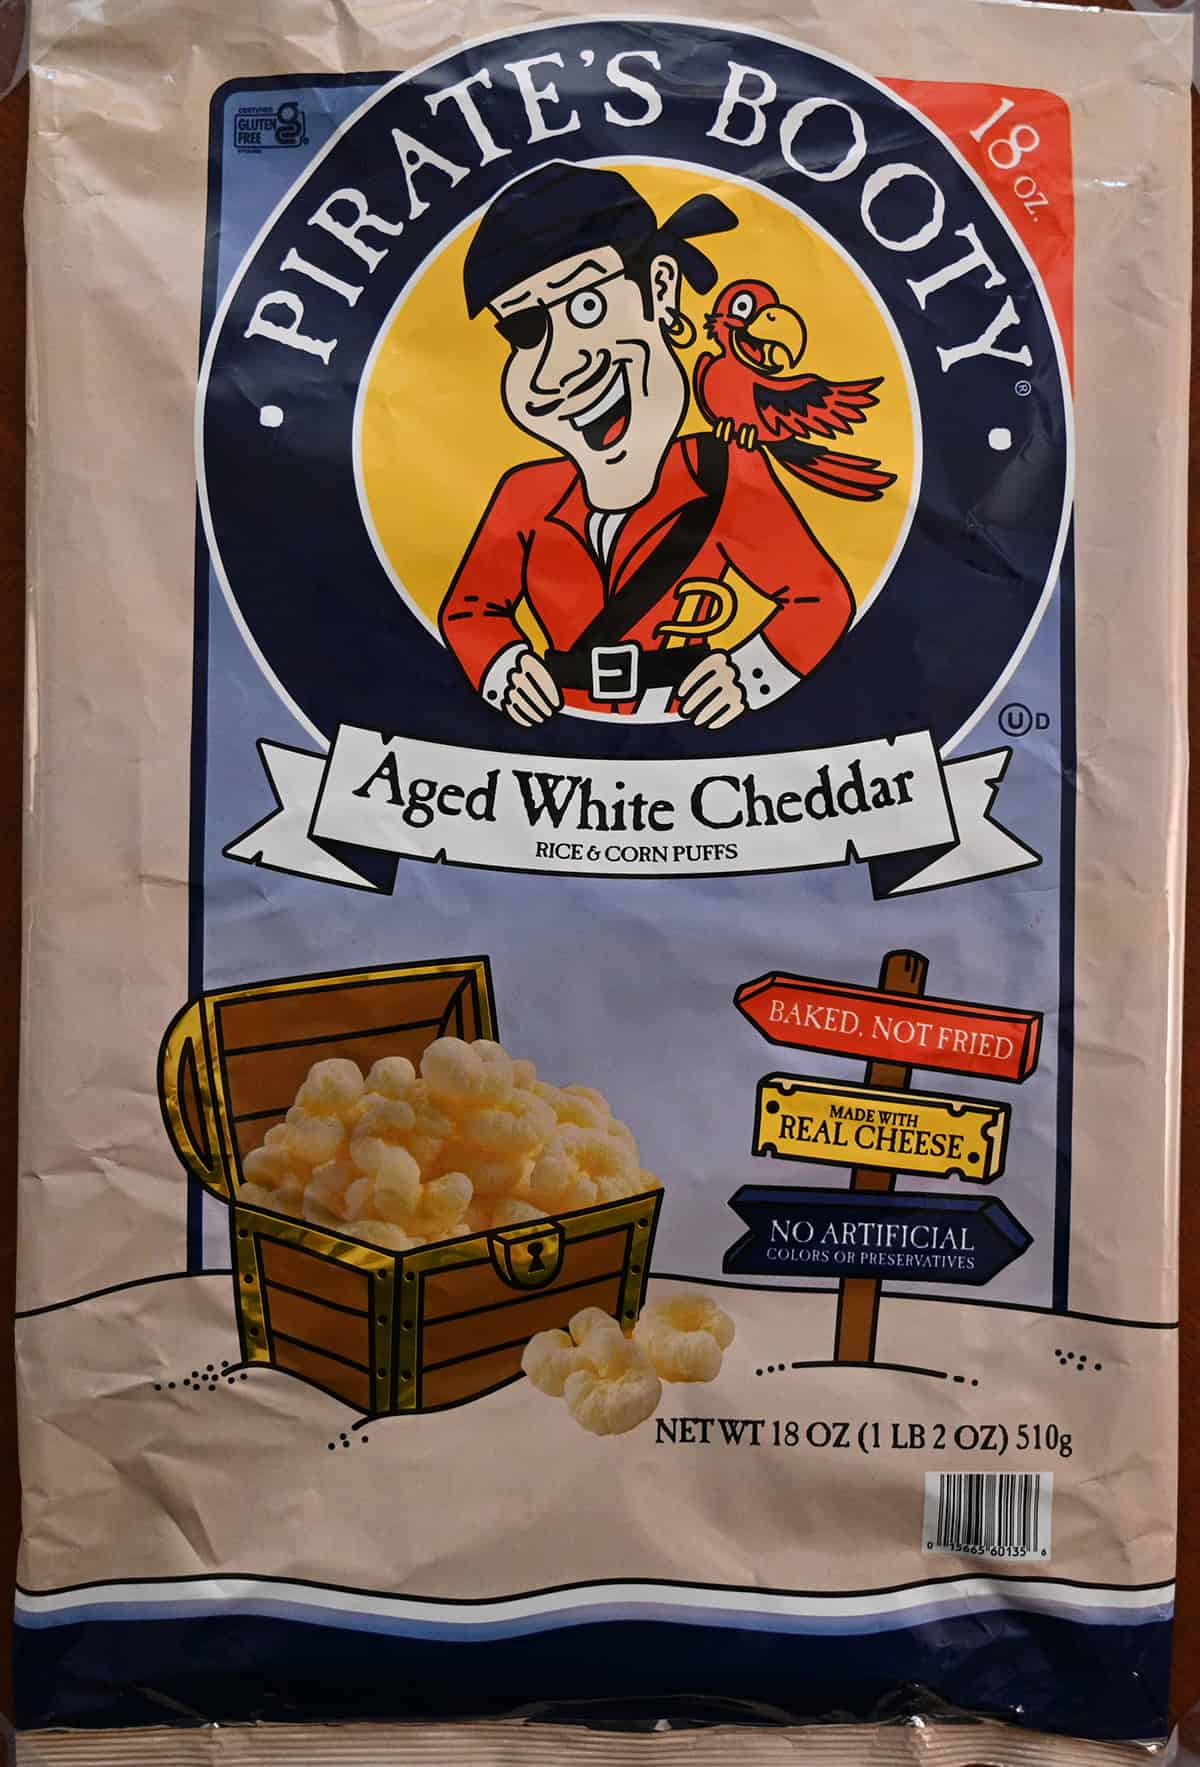 Closeup image of the front of the bag showing that Pirate's Booty has no artificial colors or preservatives and are baked, not fried.